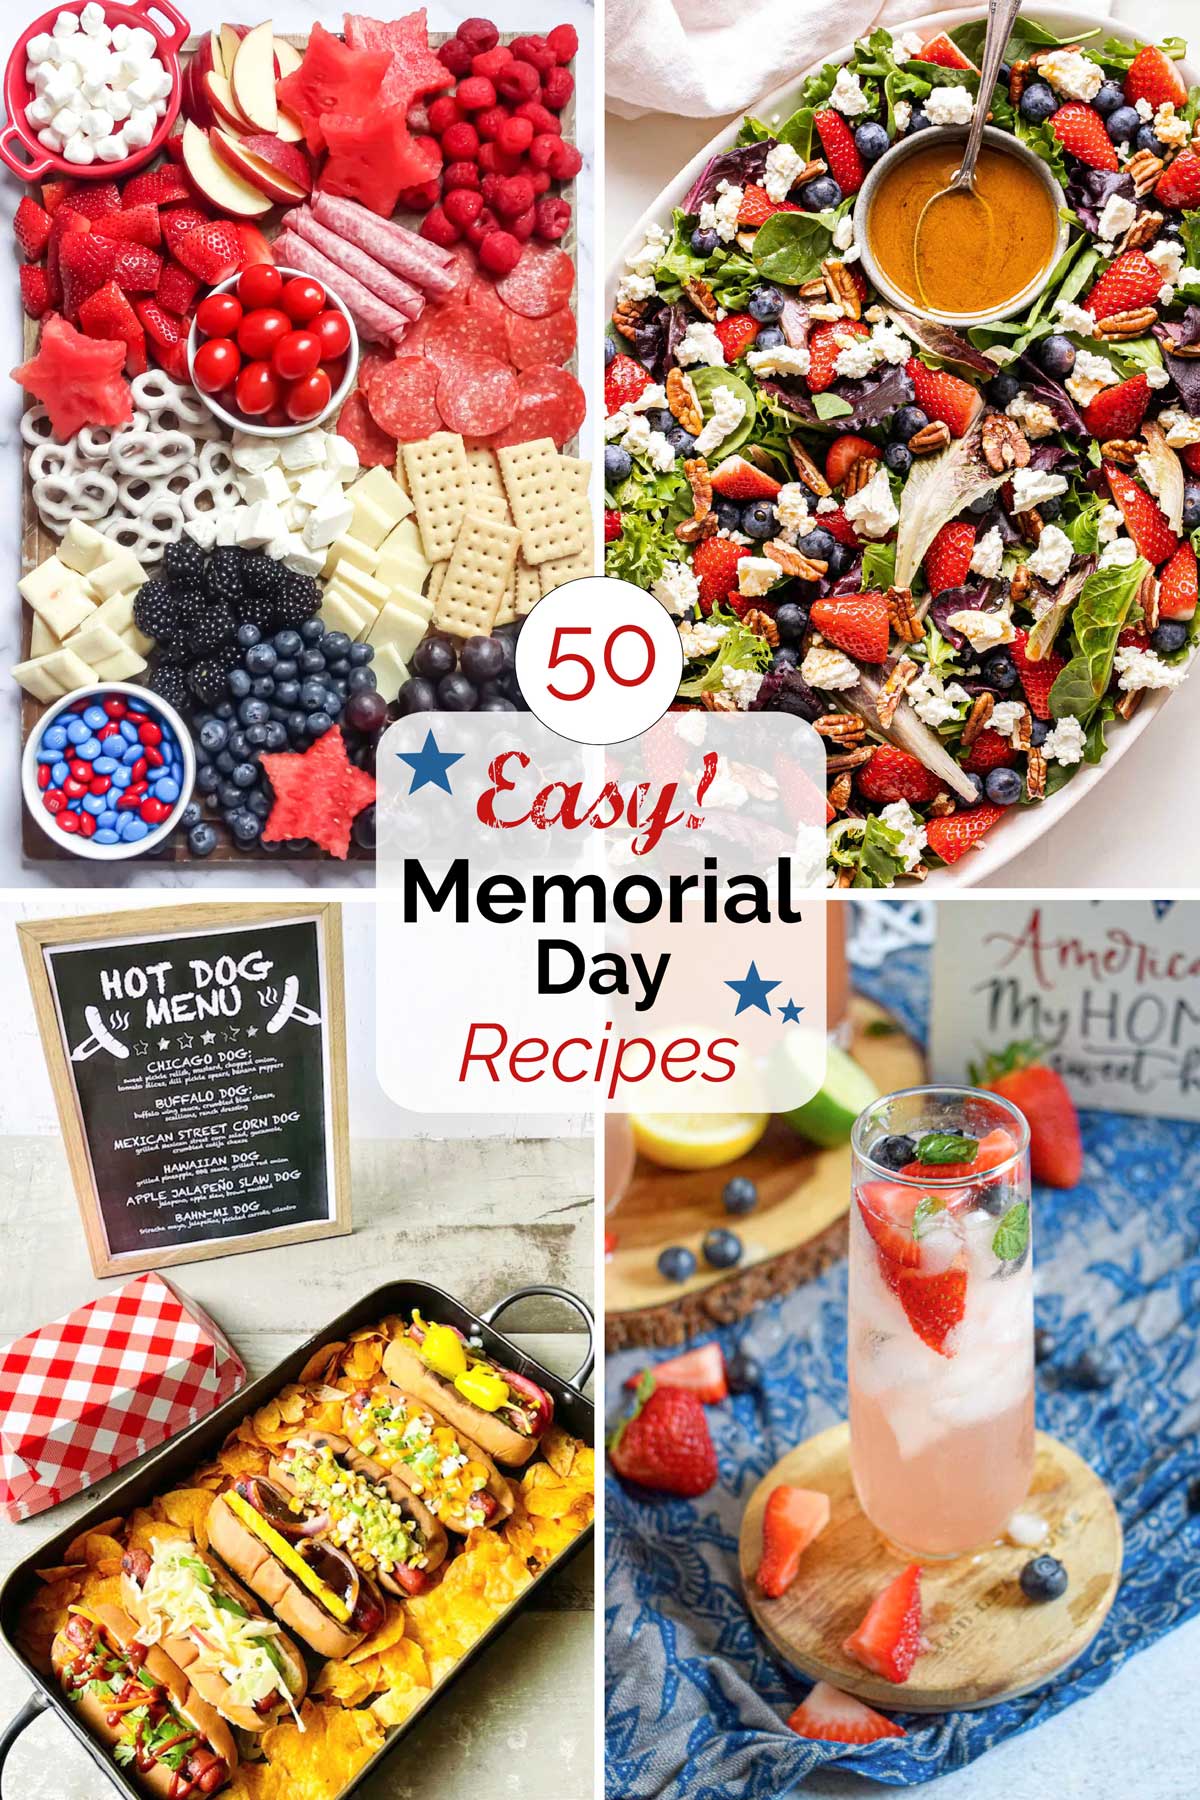 Collage of 4 of the recipes with graphic stars and text overlay "50 Easy! Memorial Day Recipes".